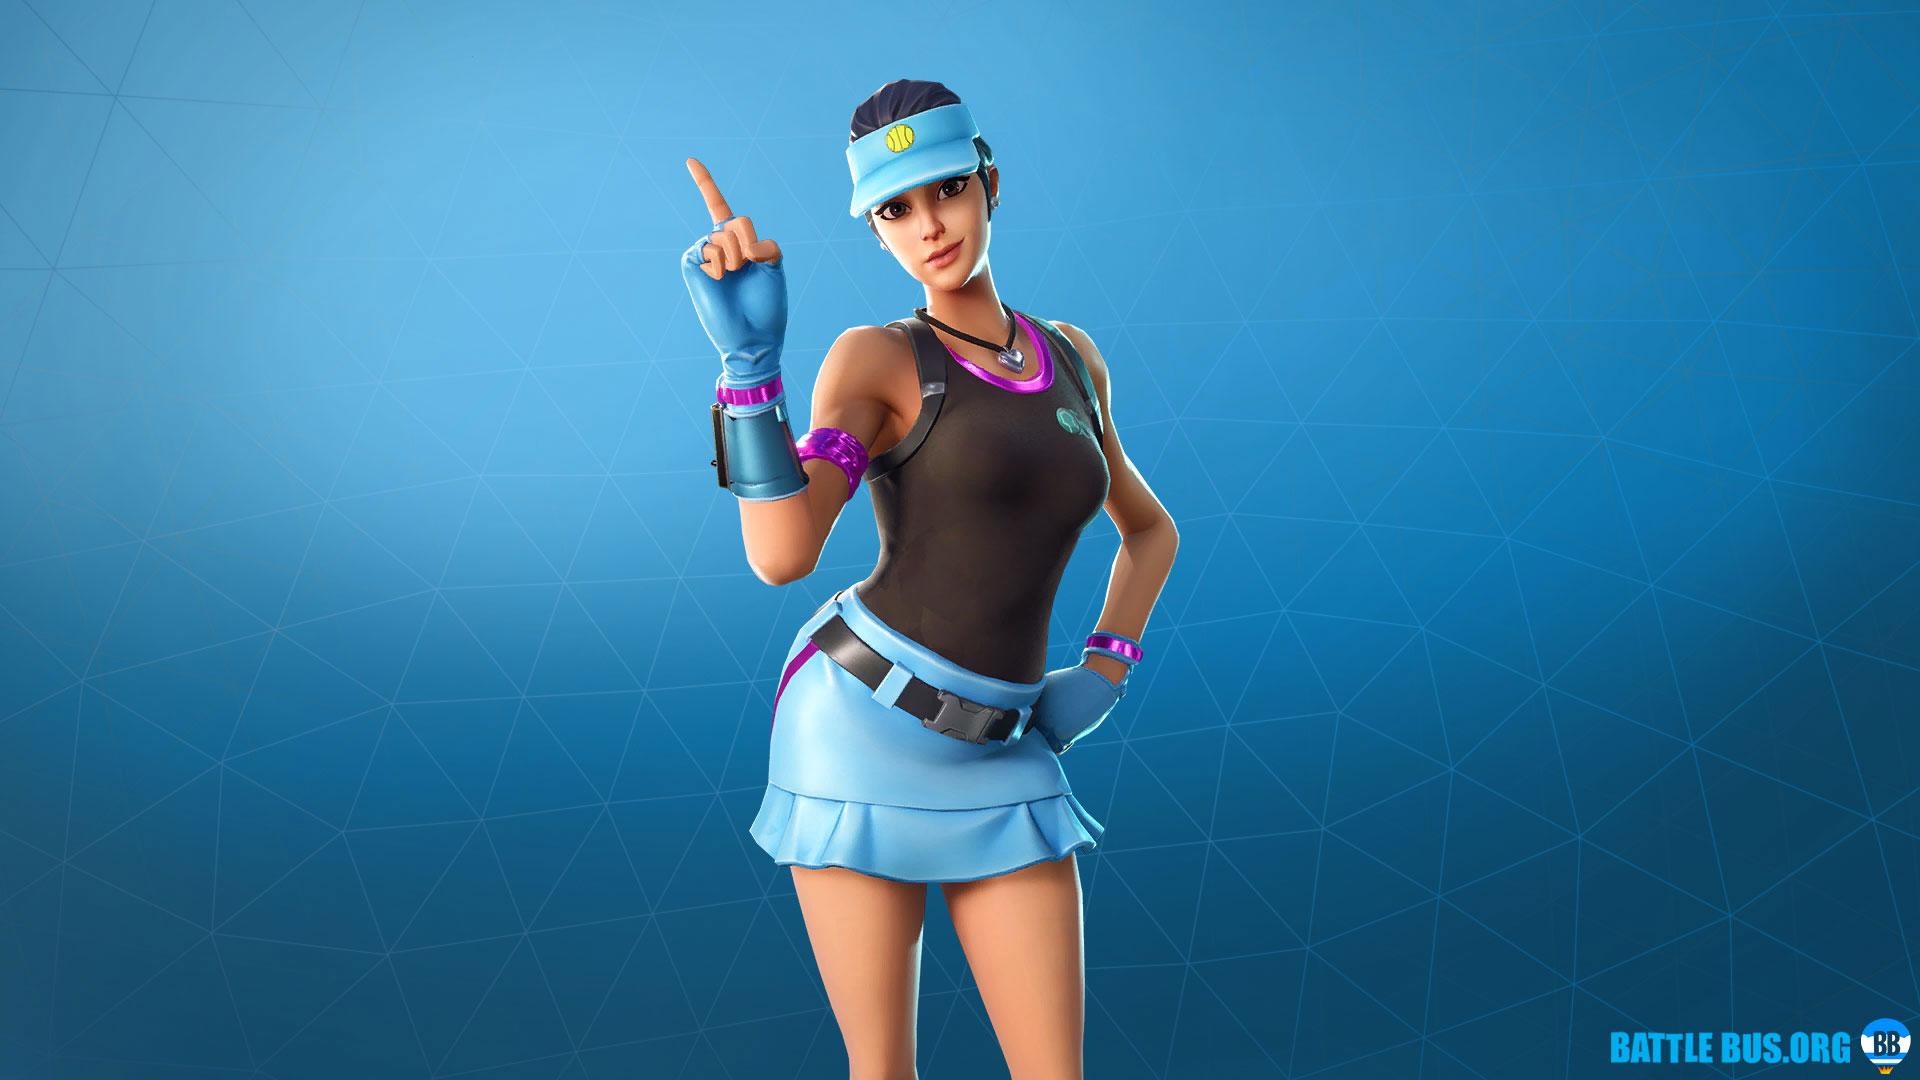 Volley Girl outfit girl Set, Fortnite skins, info, HD image